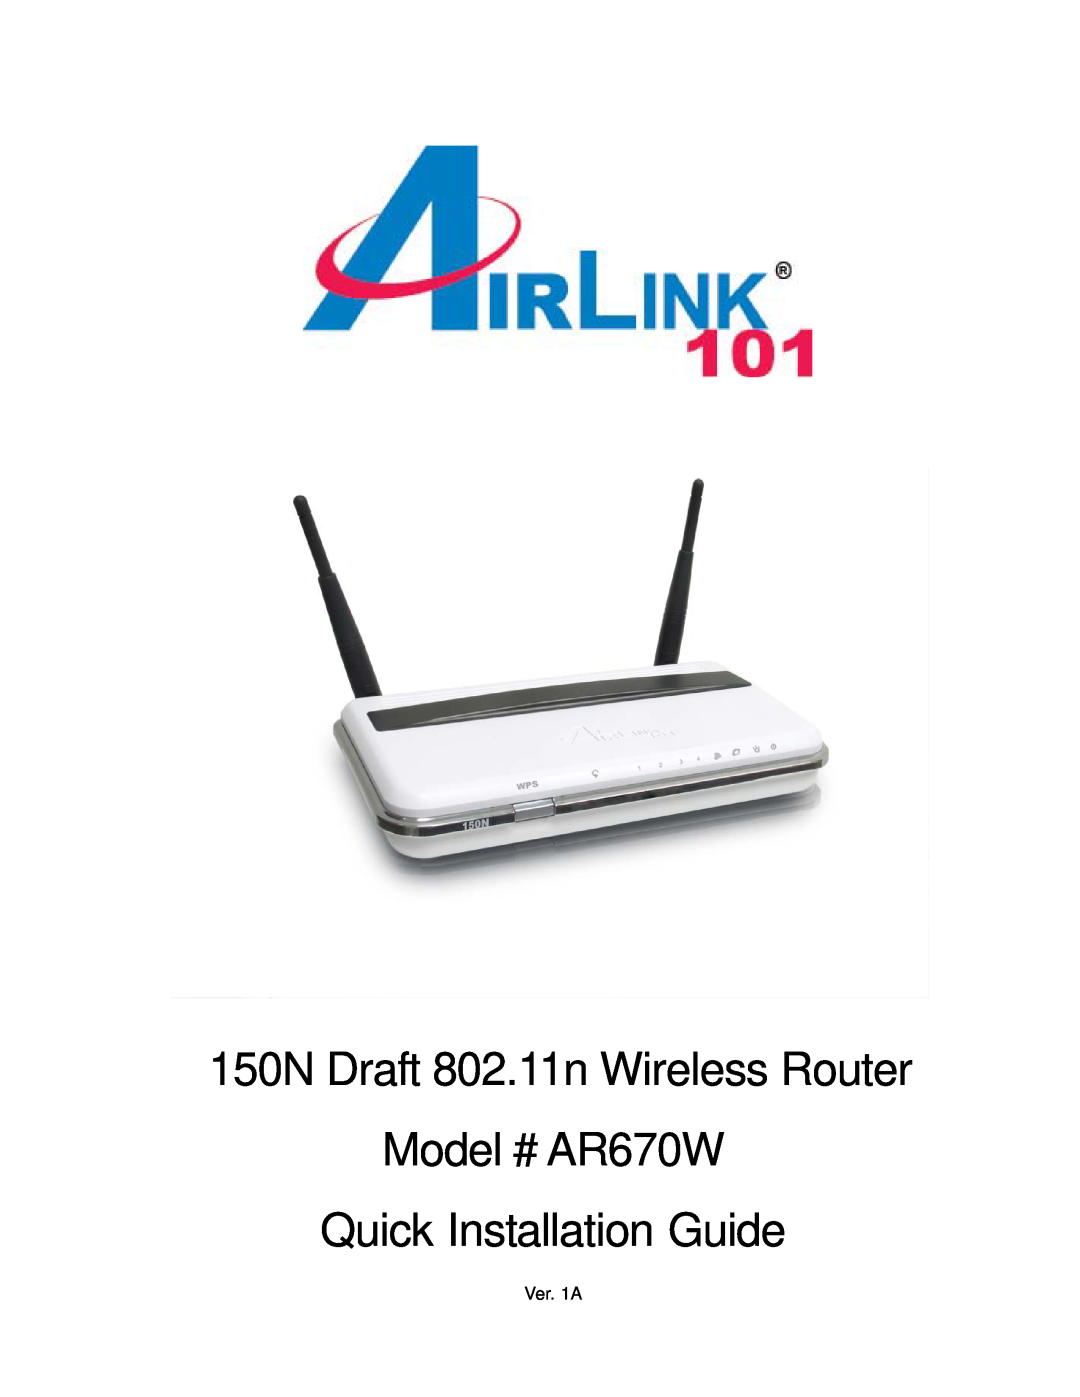 Airlink101 manual 150N Draft 802.11n Wireless Router Model # AR670W, Quick Installation Guide, Ver. 1A 